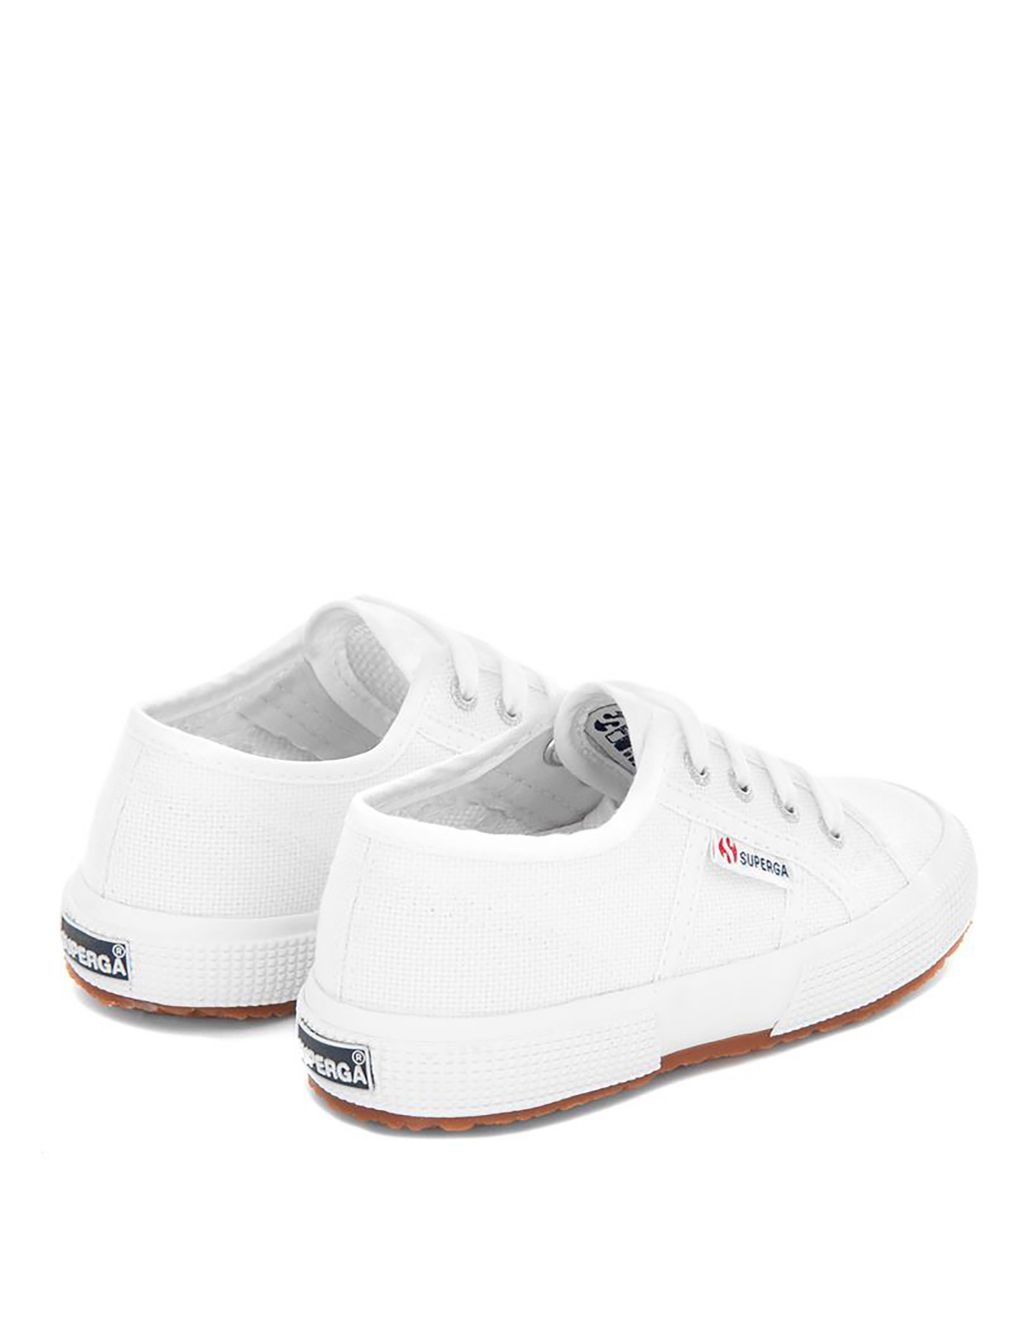 Kids' 2750 Jcot Classic Lace Up Trainers ( 10 Small - 3.5 Large) image 4